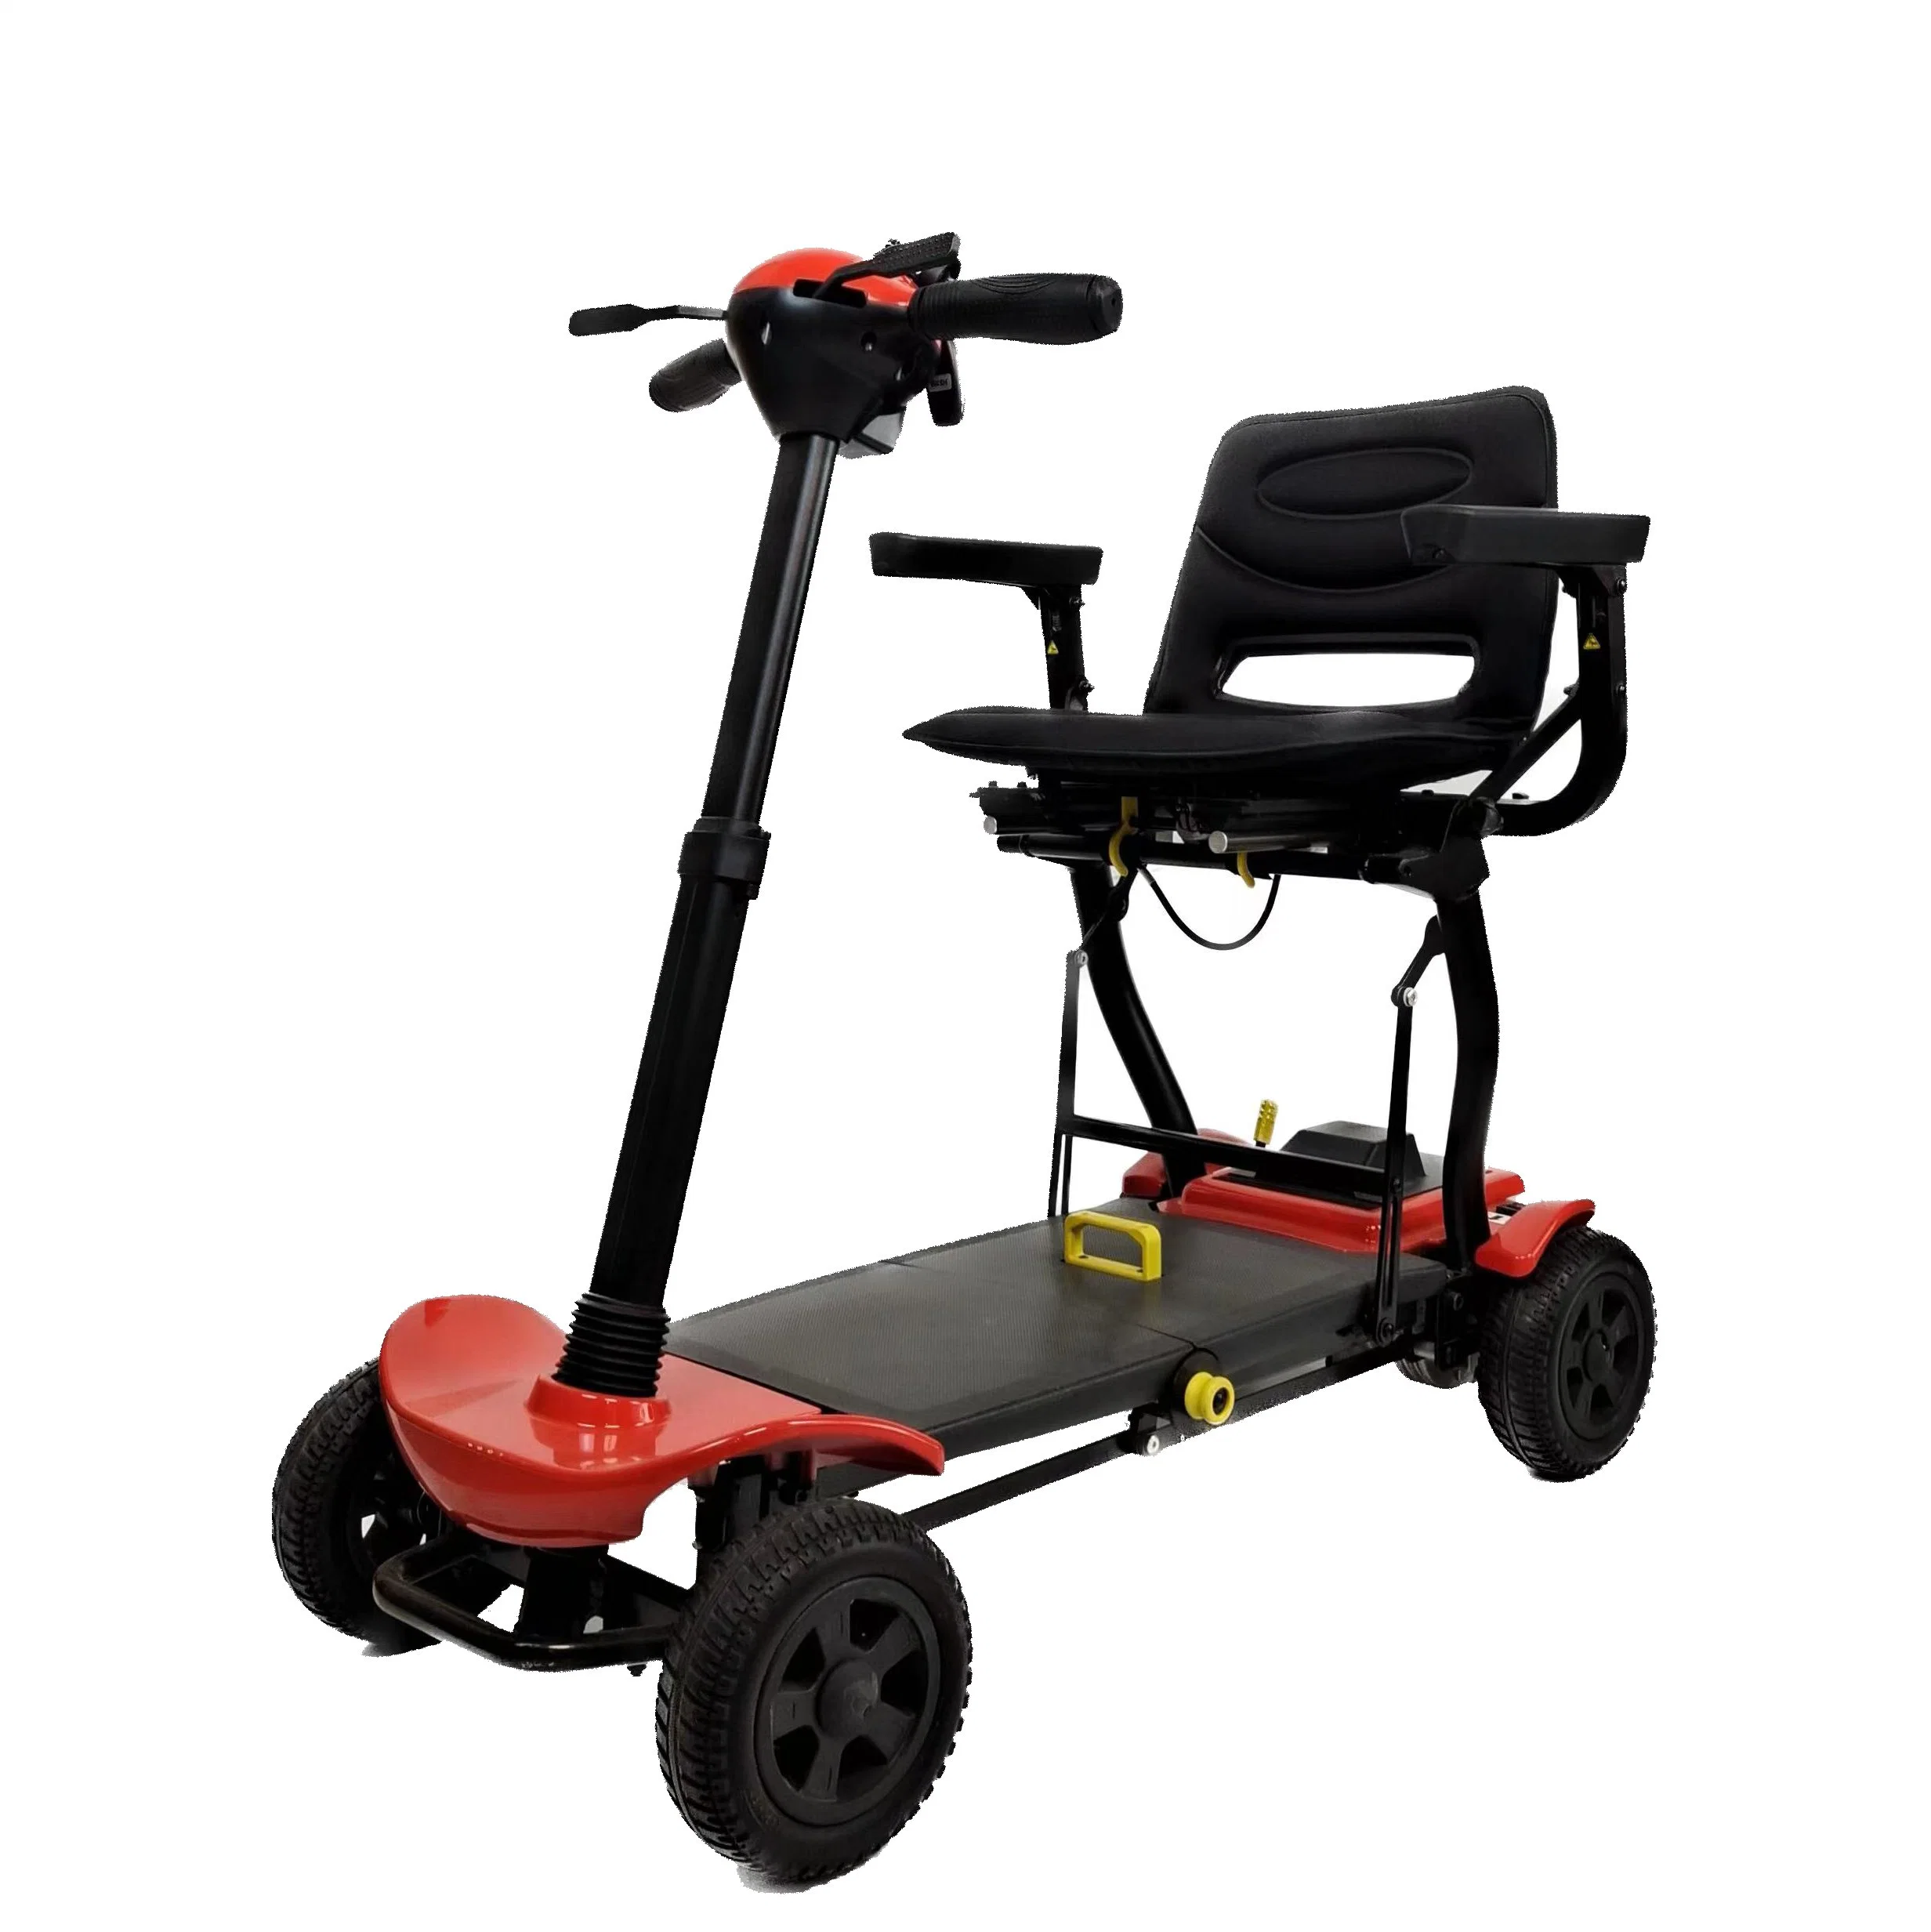 Best Portable Motorized Compact Mobility Scooter for Handicapped Elderly